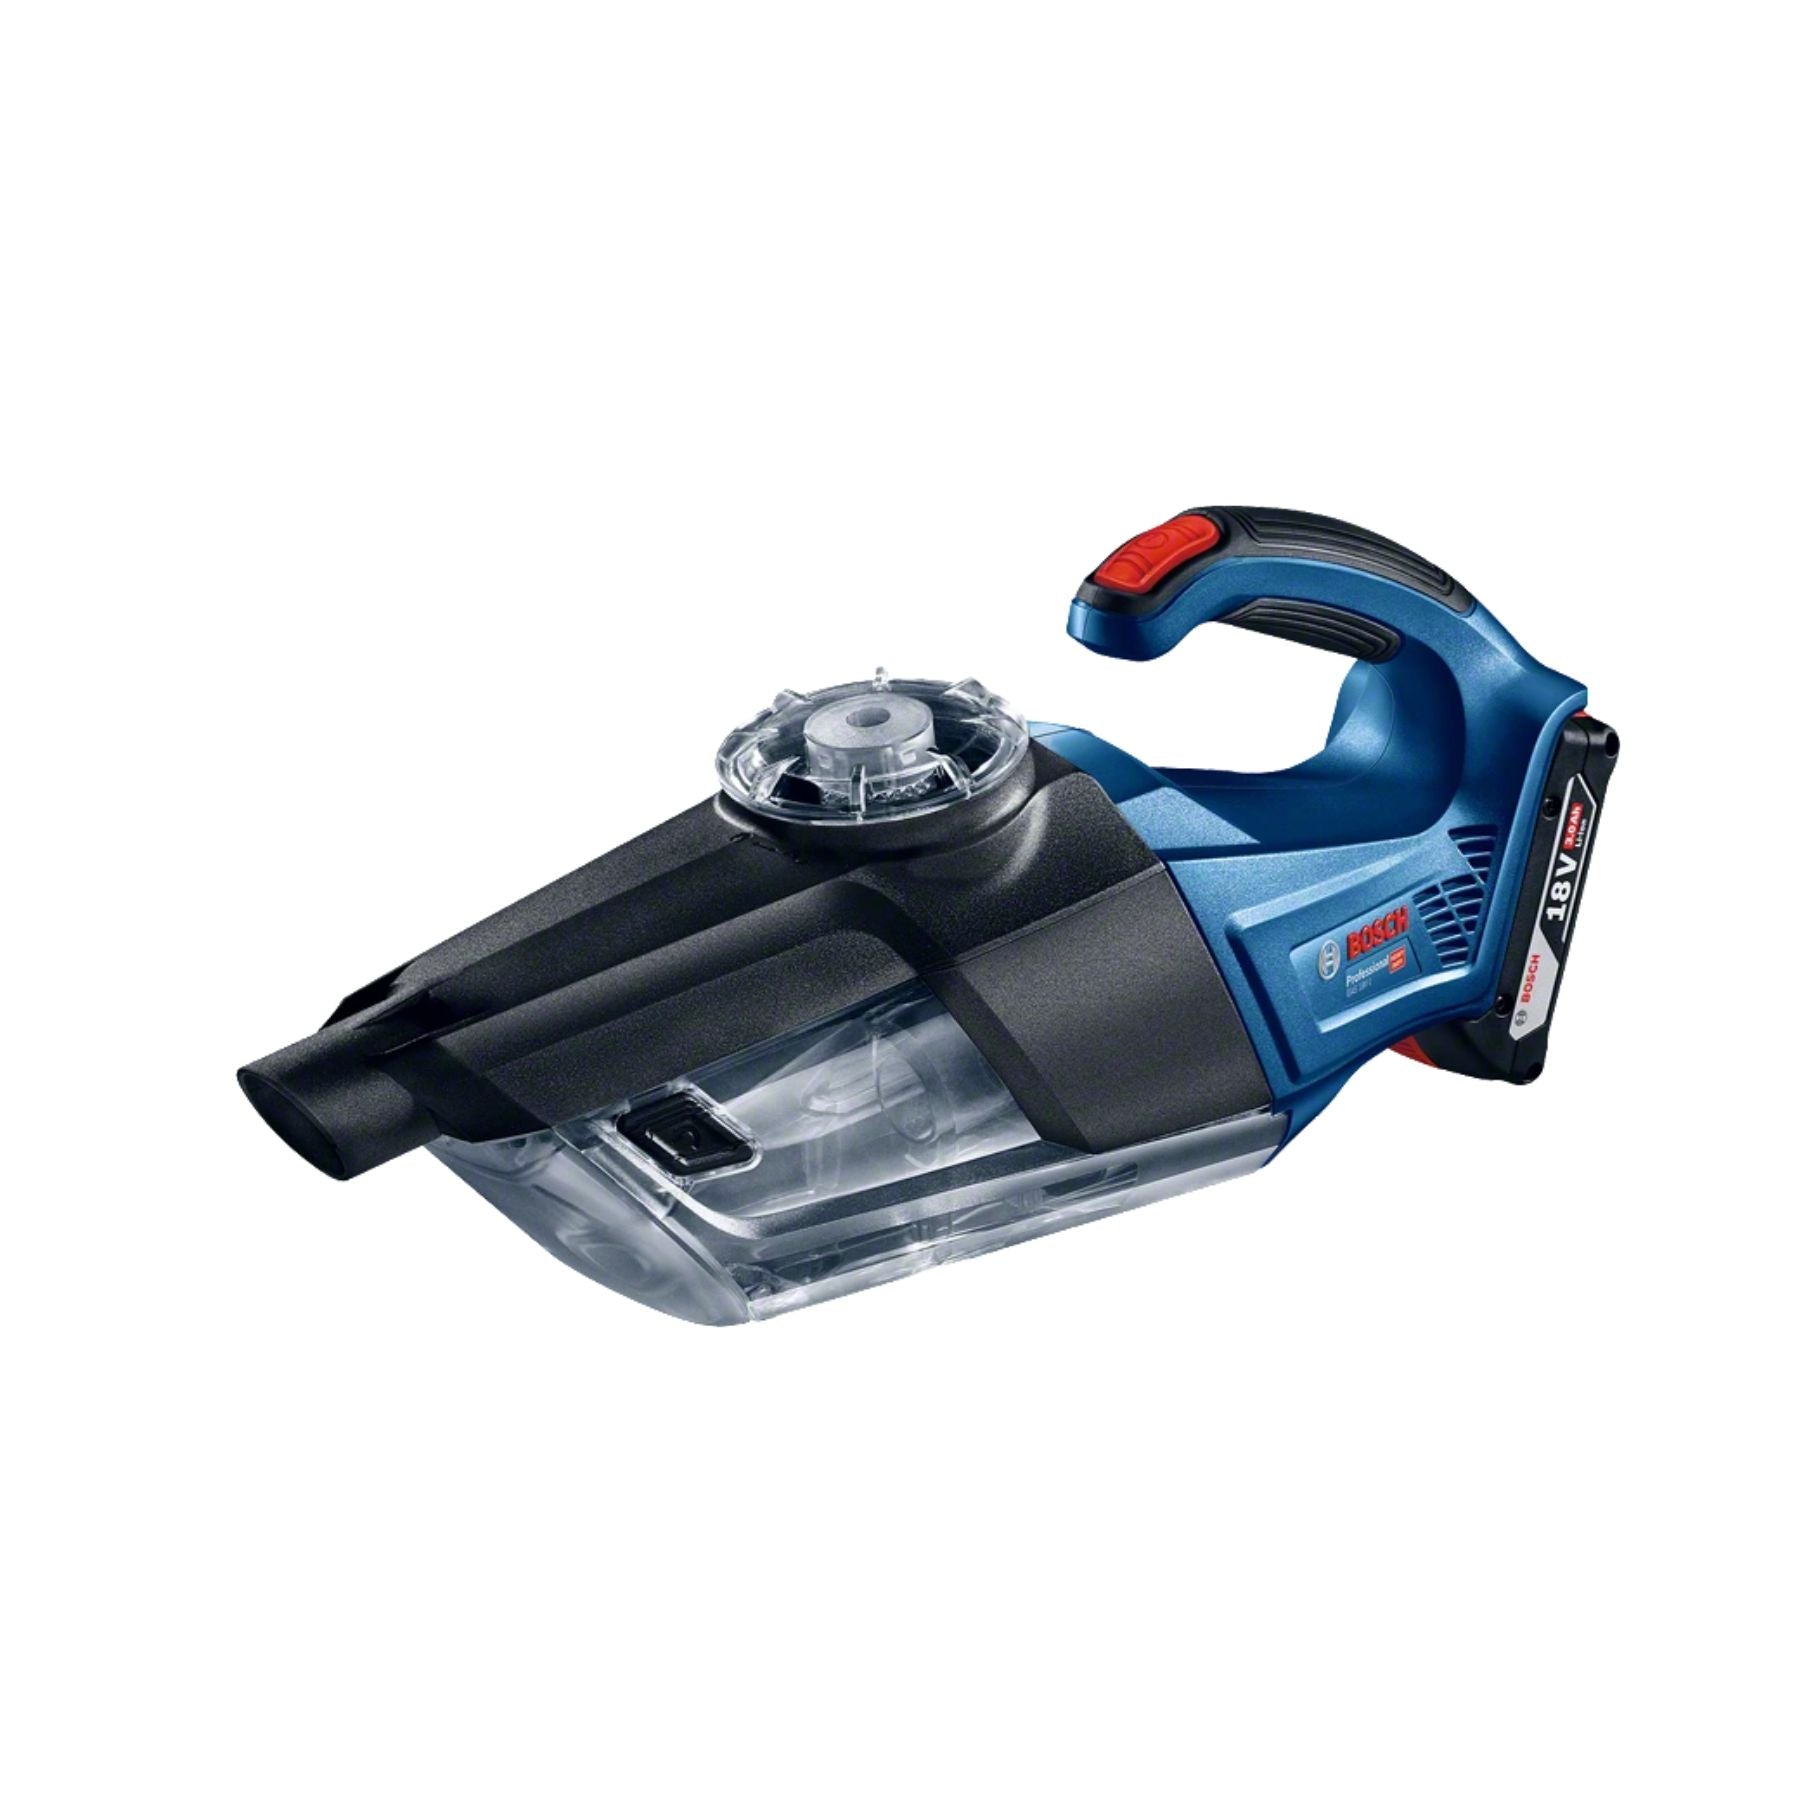 Bosch (GAS 18V-1) Cordless Vacuum Cleaner - Bare Tool